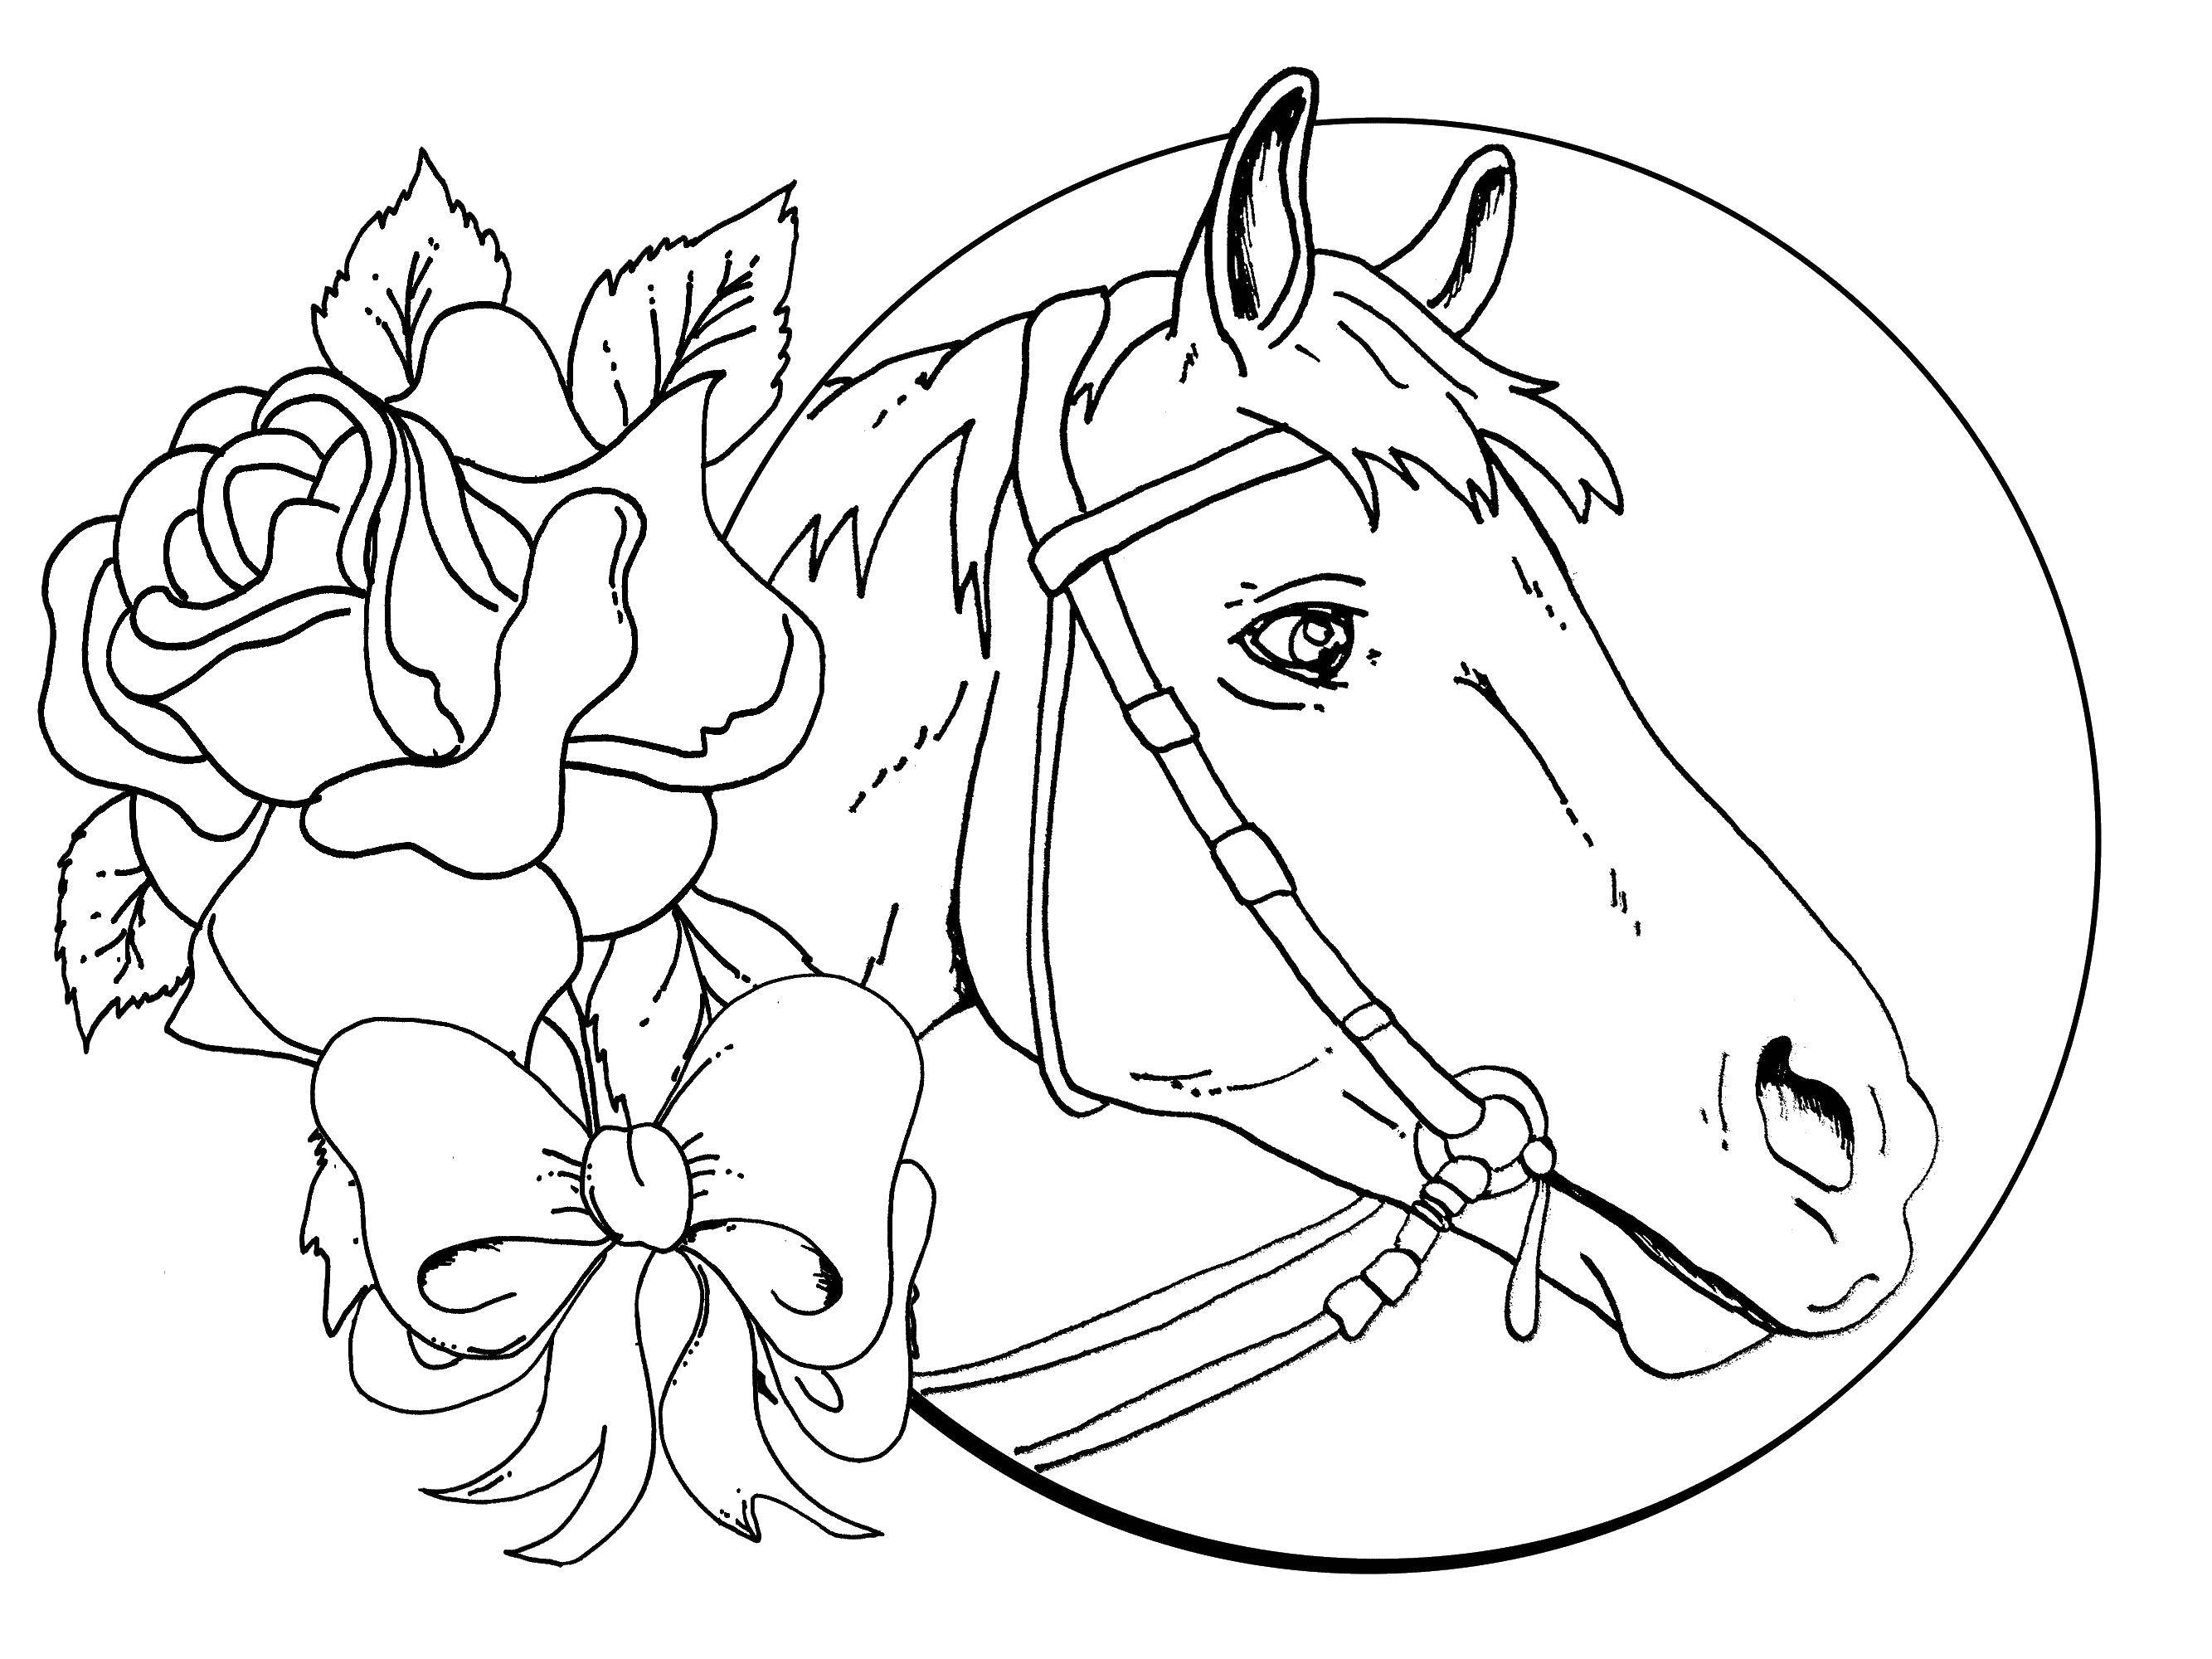 Coloring The horse rose. Category horse. Tags:  the horse, rose, bow.